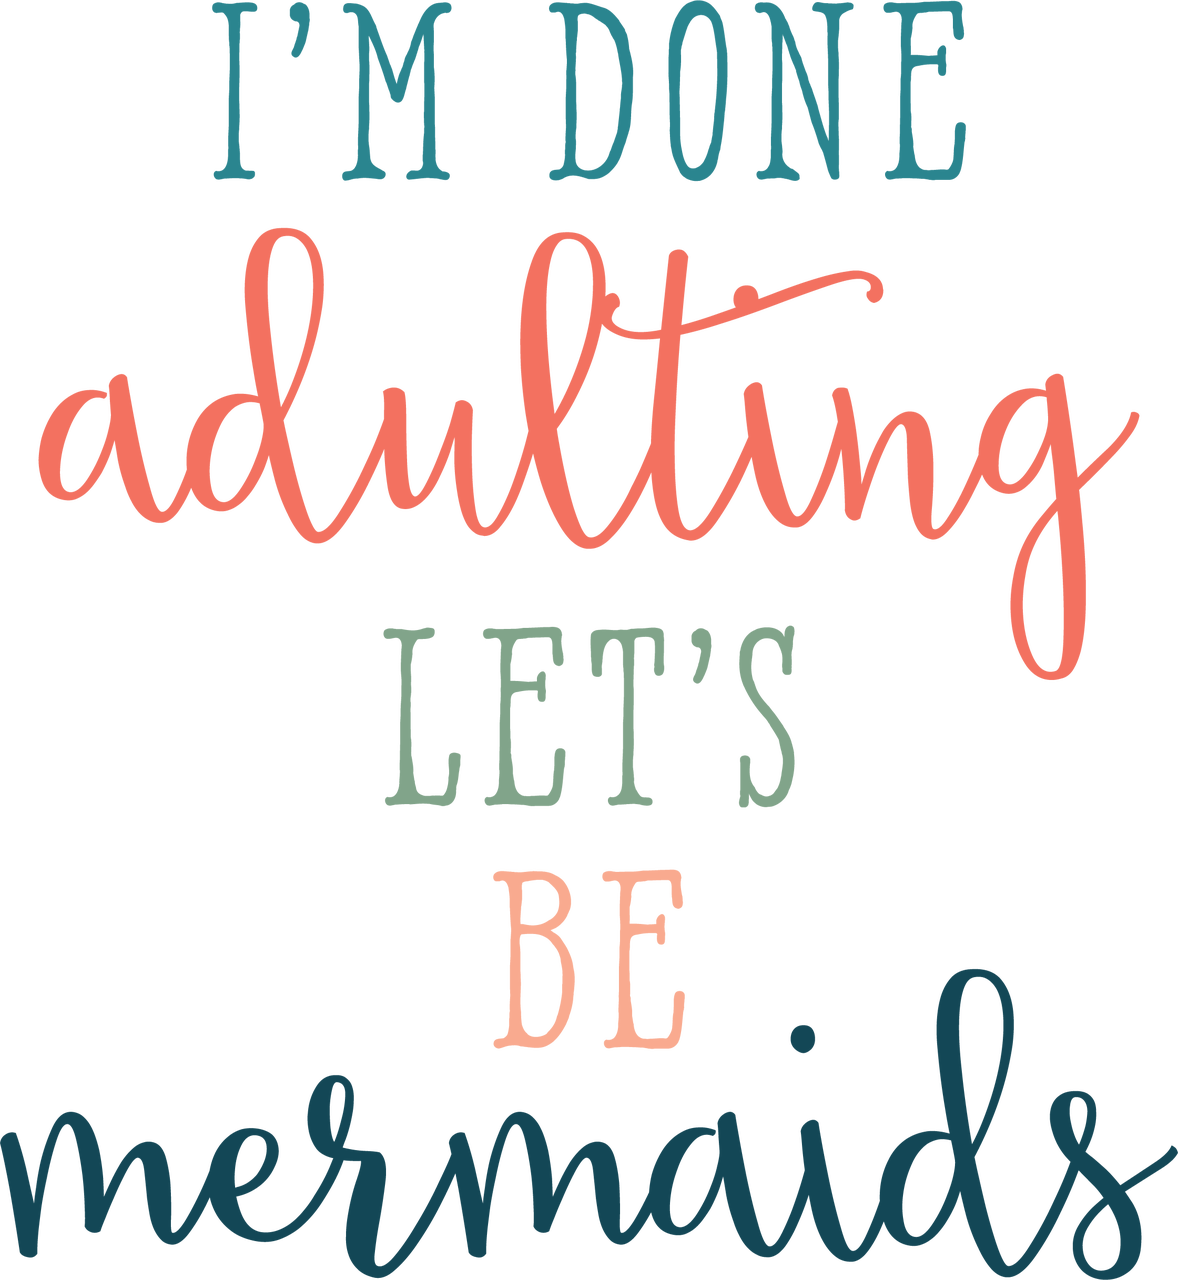 Adulting be done i/m mermaids let/s Im Done